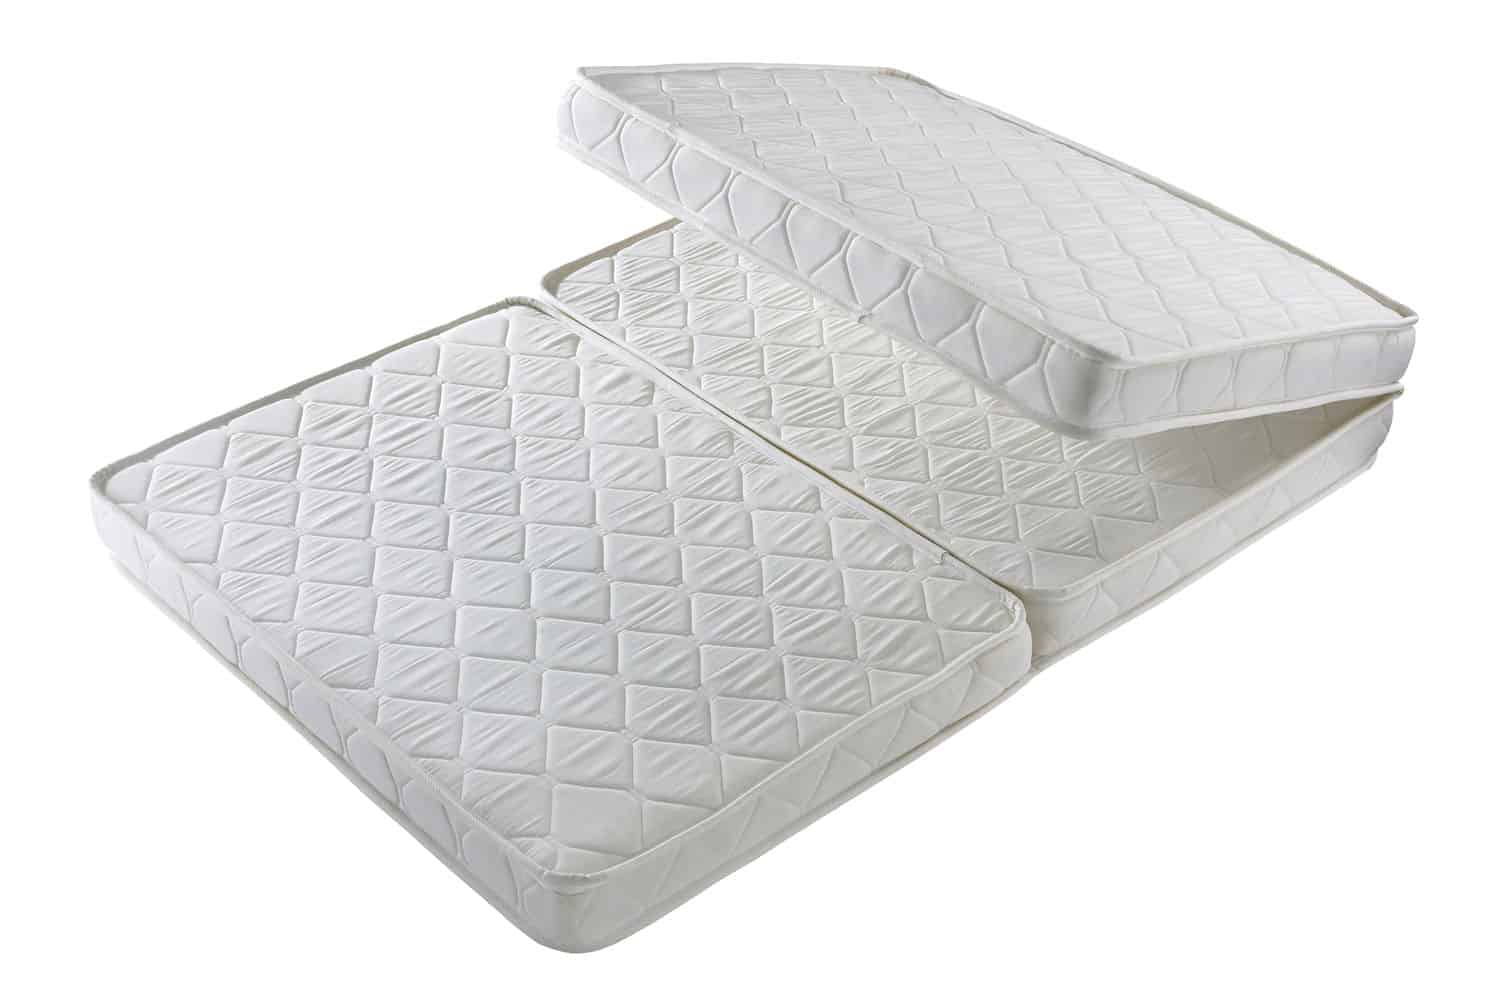 White mattress folded into 3 sections